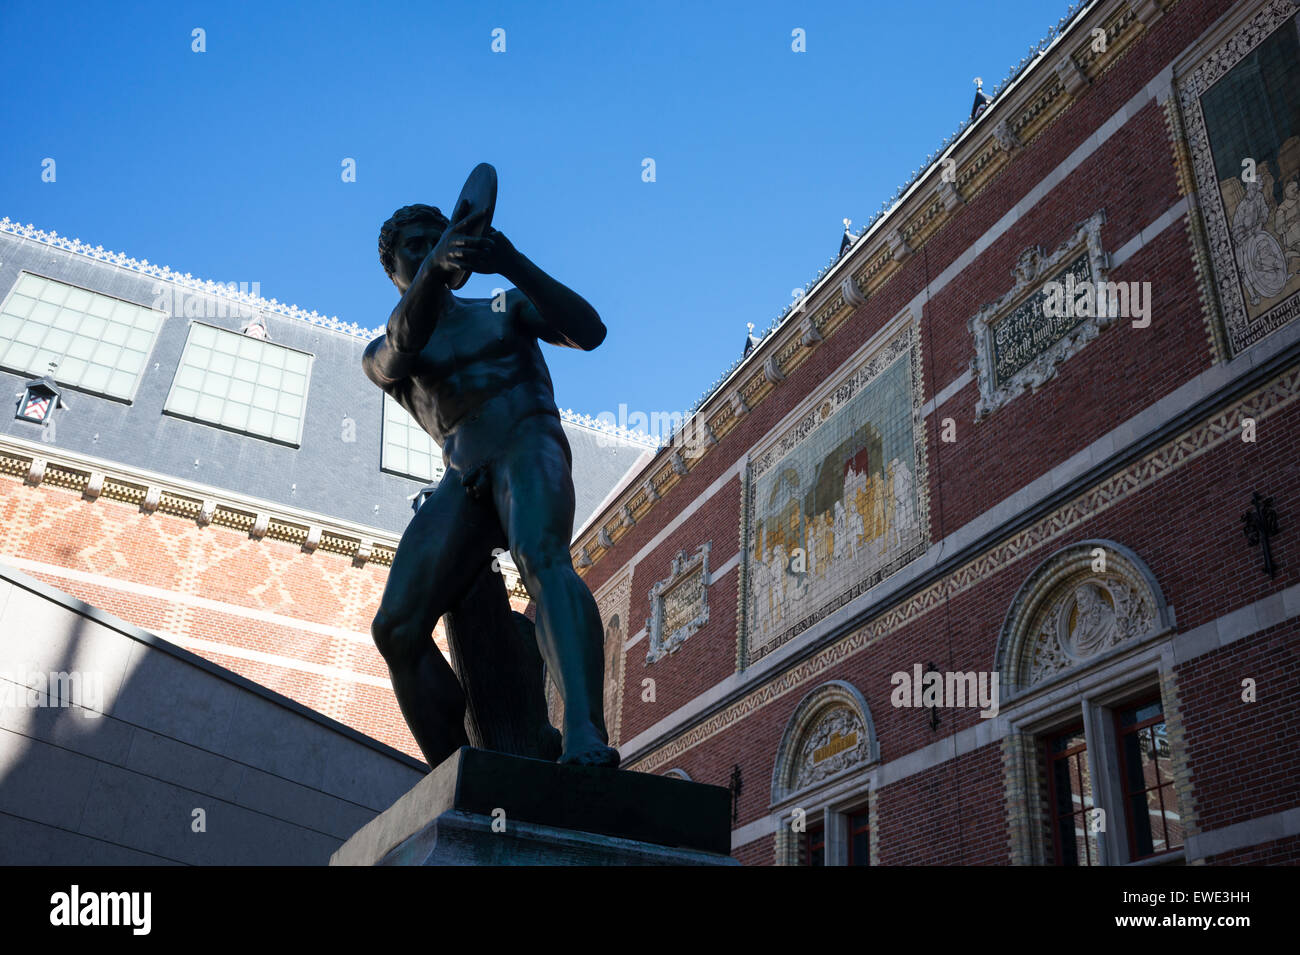 Amsterdam, the statue of a discus thrower in  the Rijksmuseum courtyard Stock Photo